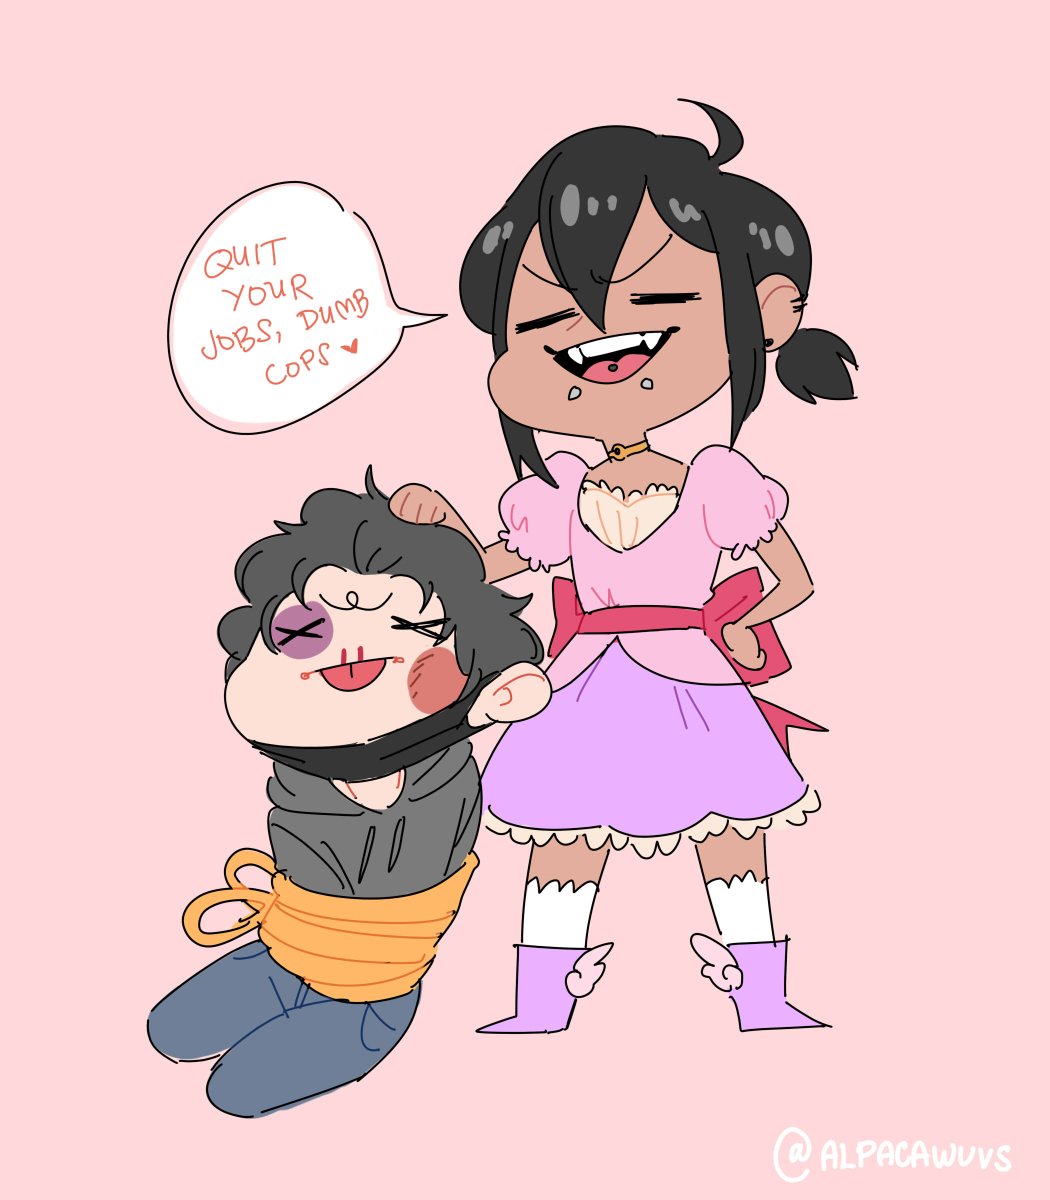 JUST IN: some guy in a magical girl costume beats up p*do
#artph 